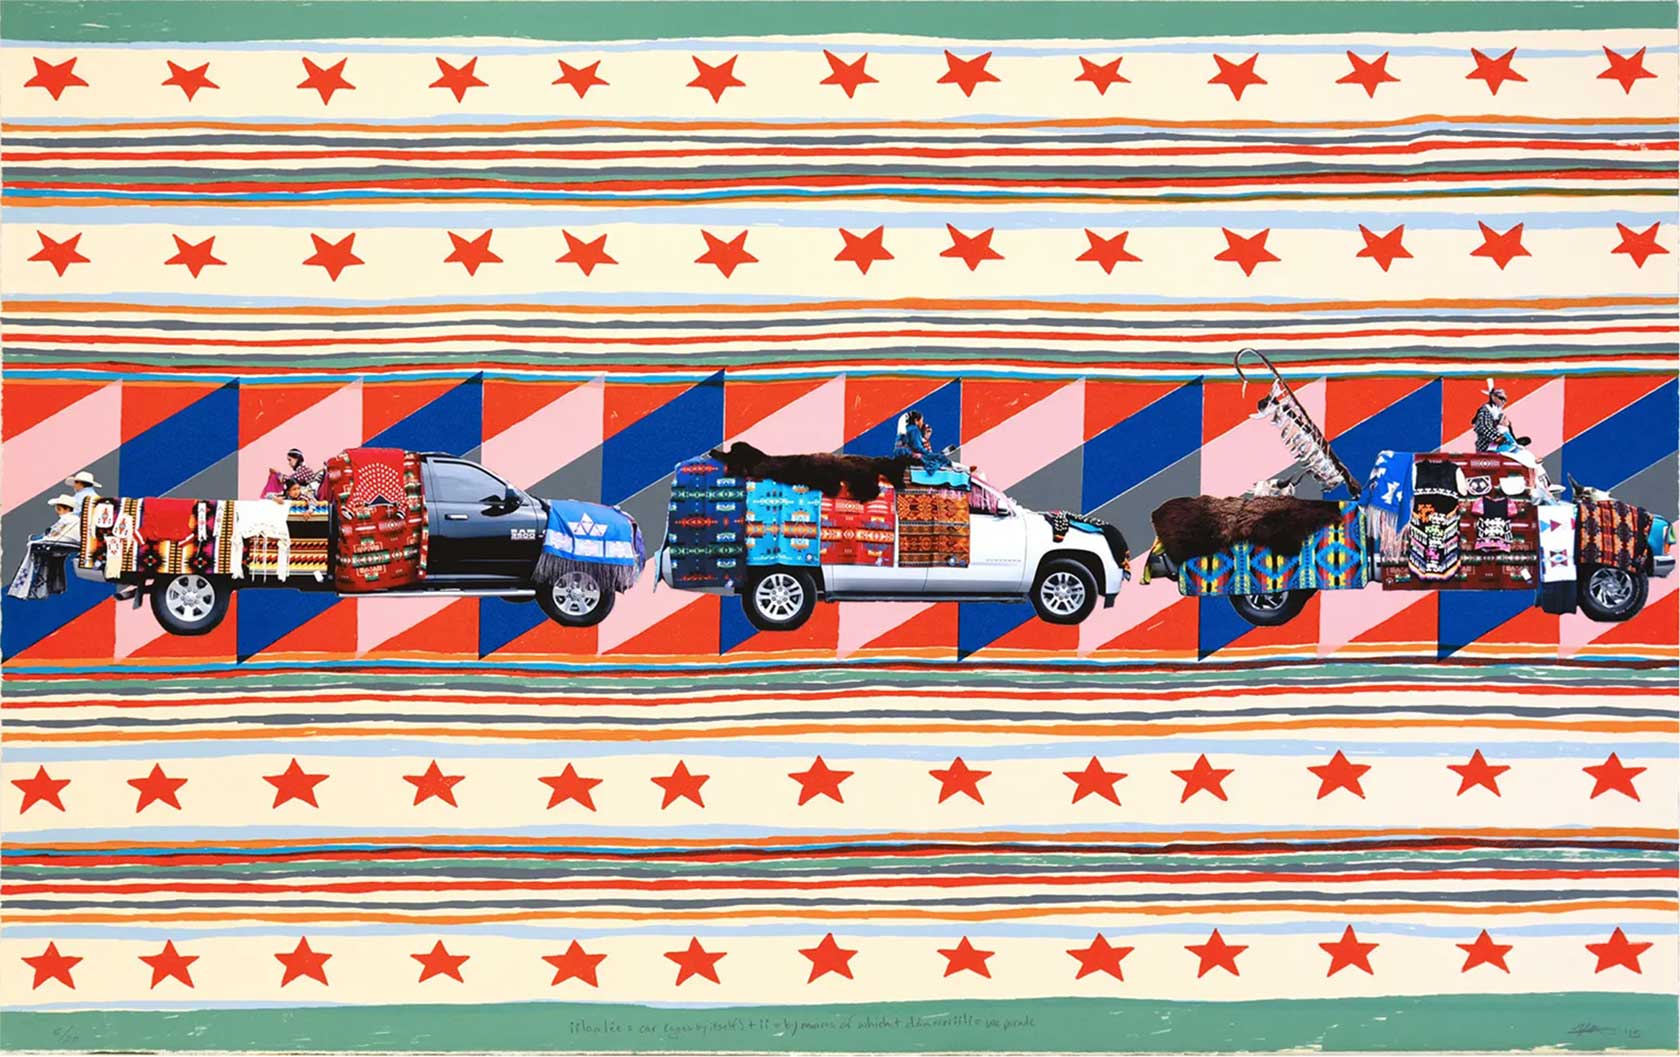 Artwork featuring trucks with people against a backdrop of a patterned blanket